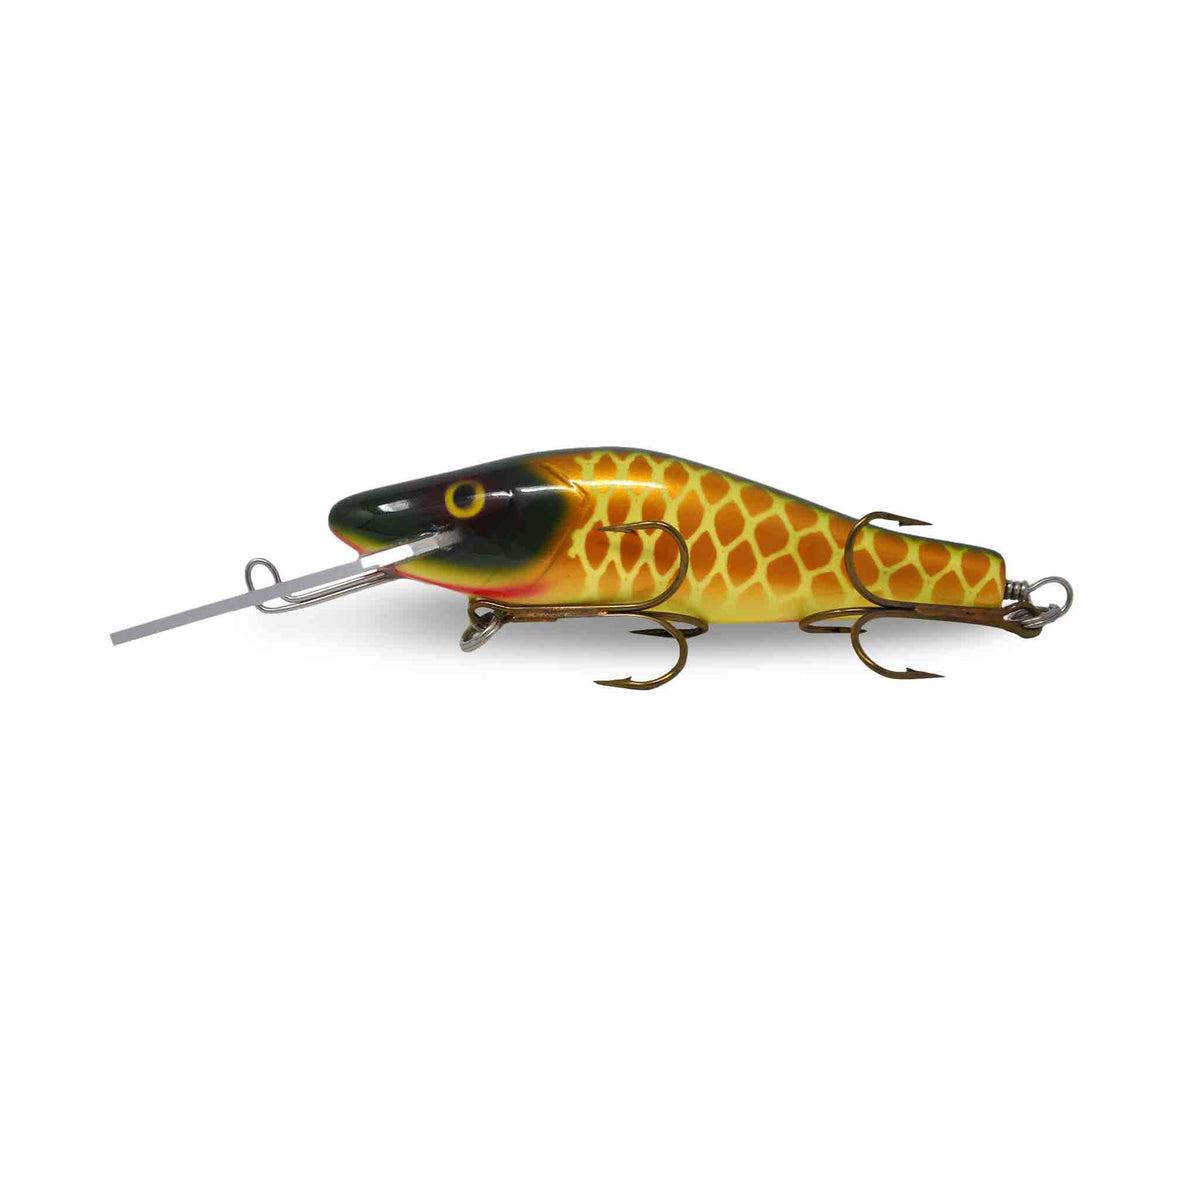 View of Crankbaits Legend lures Perch Bait Jr Crankbait St. Lawrence available at EZOKO Pike and Musky Shop